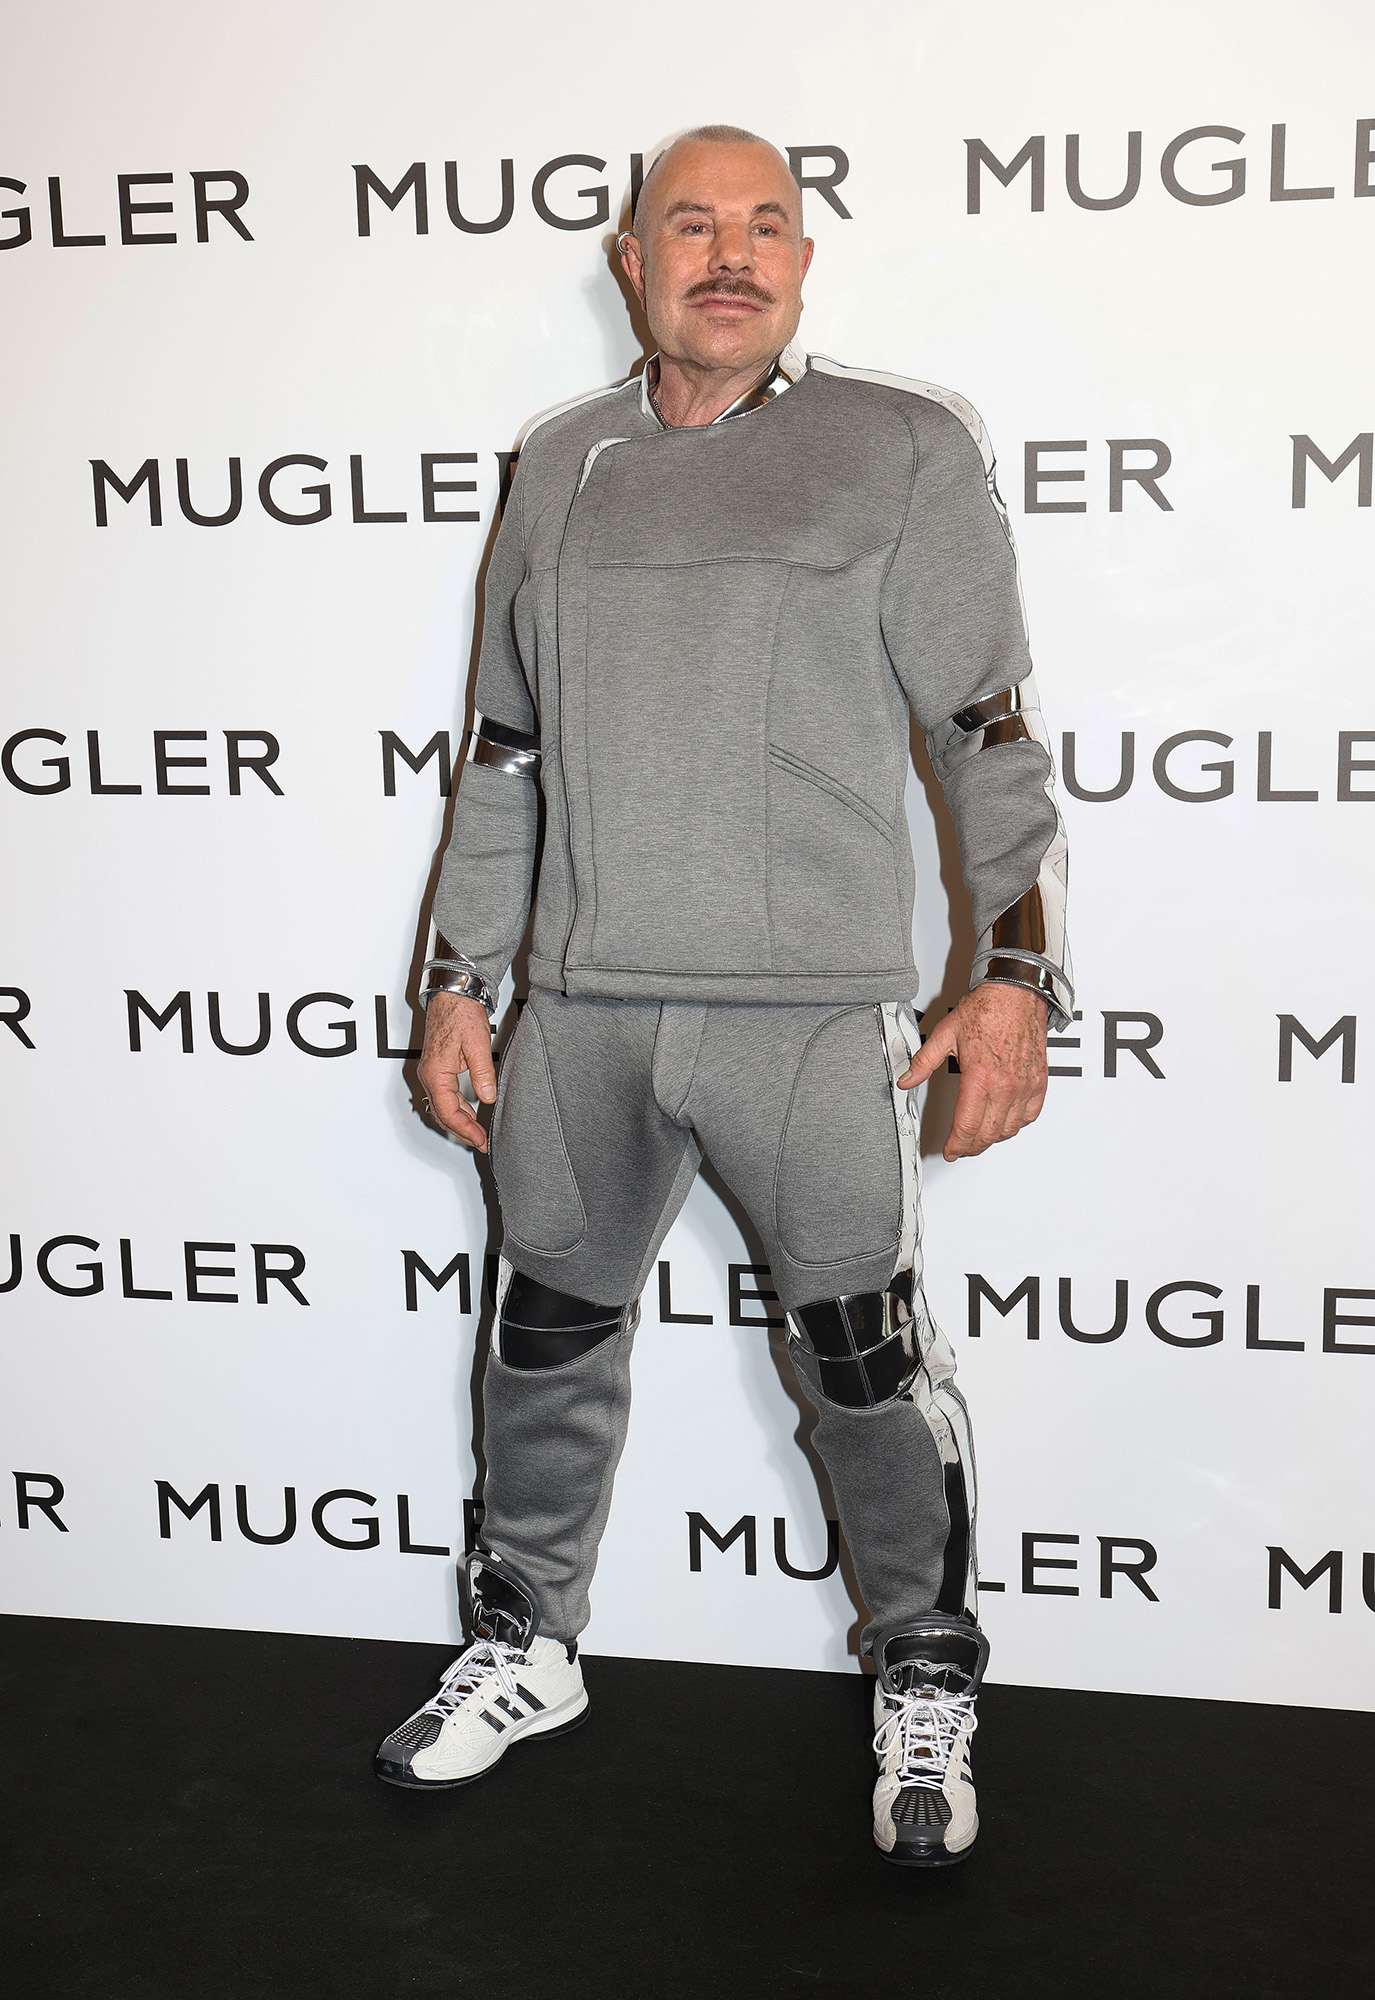 Thierry Mugler, Legendary French Fashion Designer, Has Died at 73